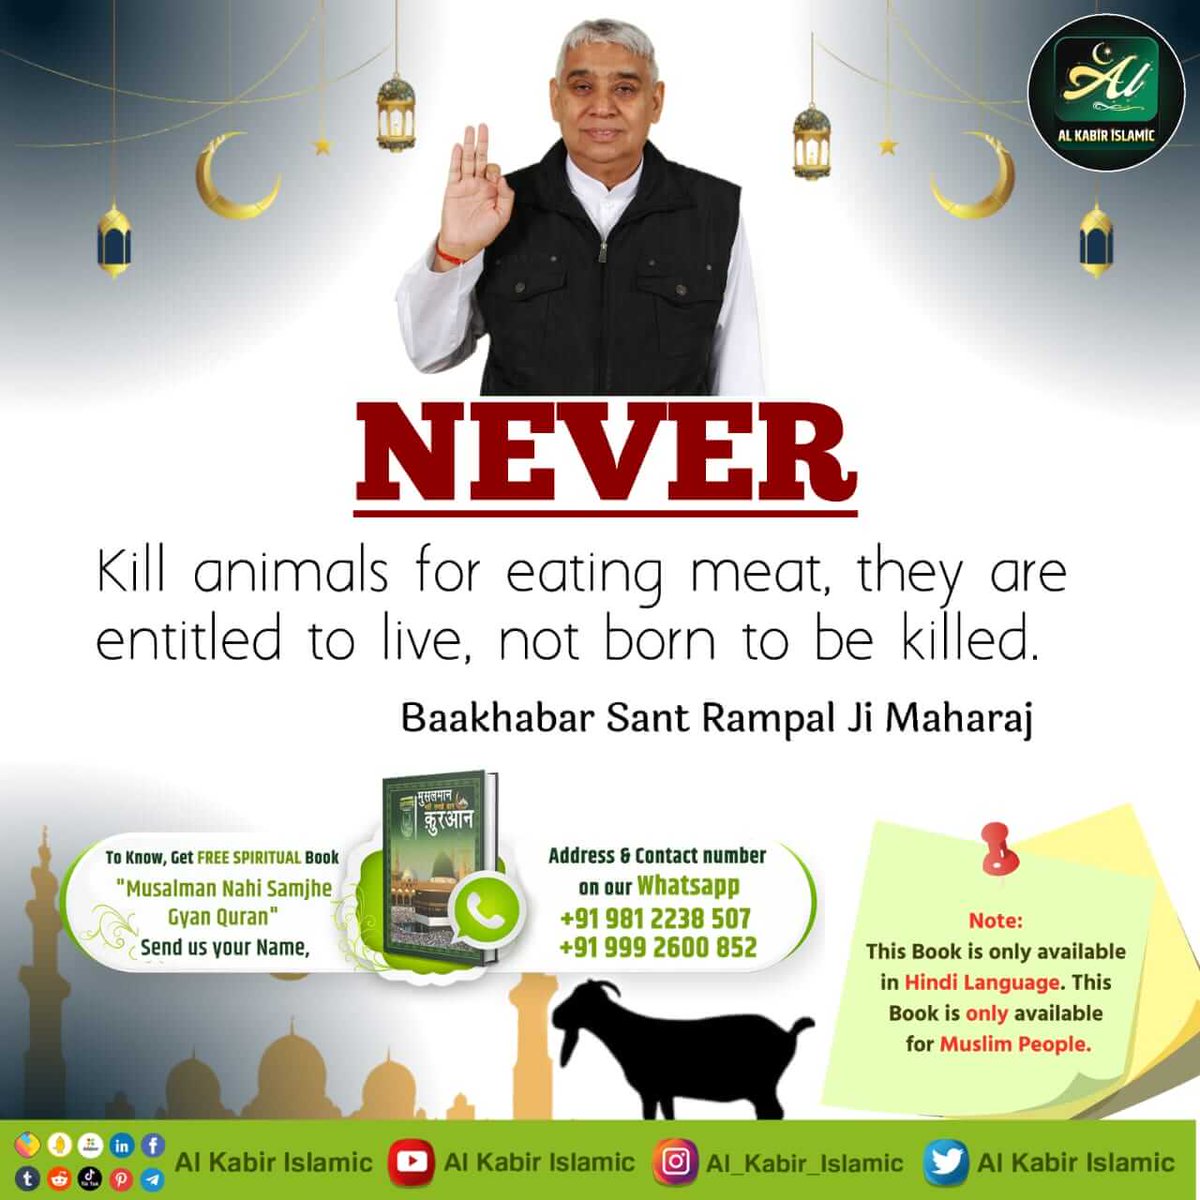 Kill animals for eating meat, they are entitled to live, not born to be killed.

Baakhabar Sant Rampal Ji Maharaj
#रहम_करो_मूक_जीवों_पर